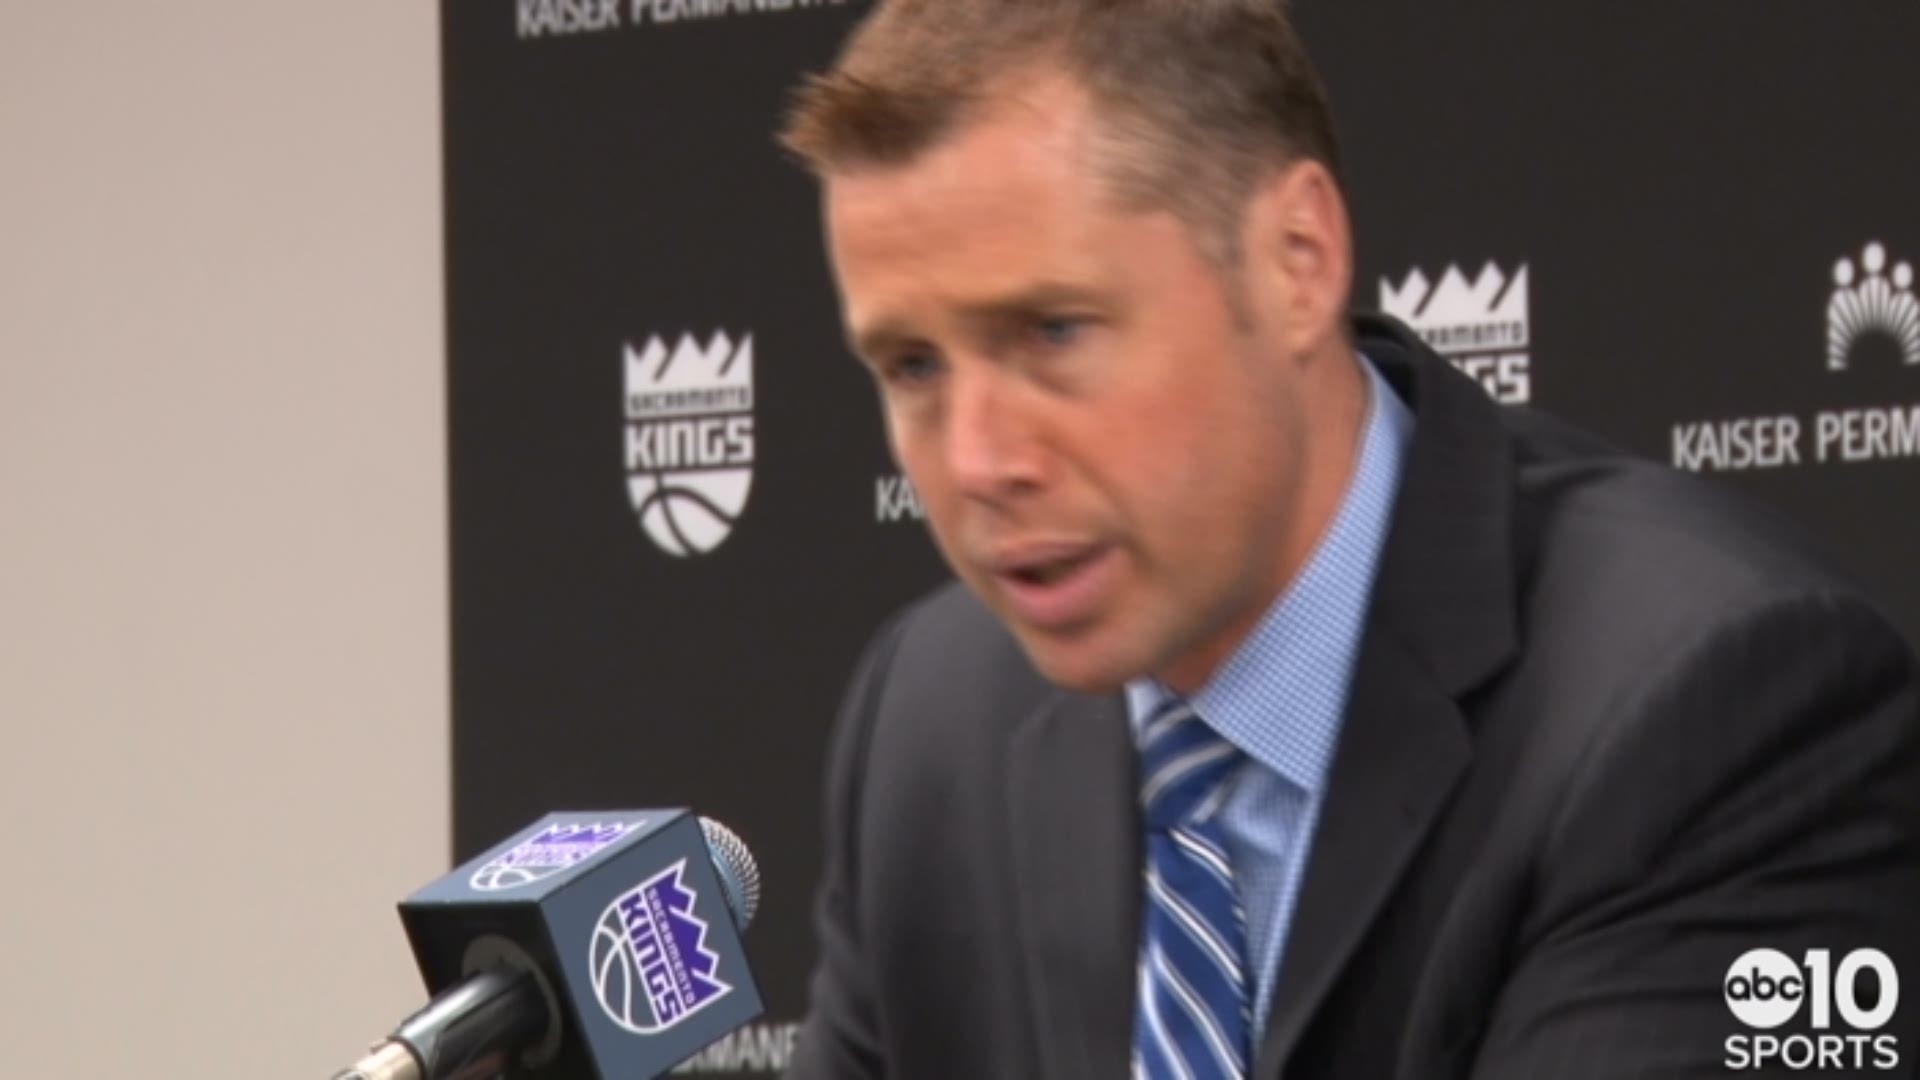 Kings head coach Dave Joerger talks about Saturday's loss to the Warriors and the play which resulted in Patrick McCaw being stretchered off the floor to the UC Davis Medical Center.